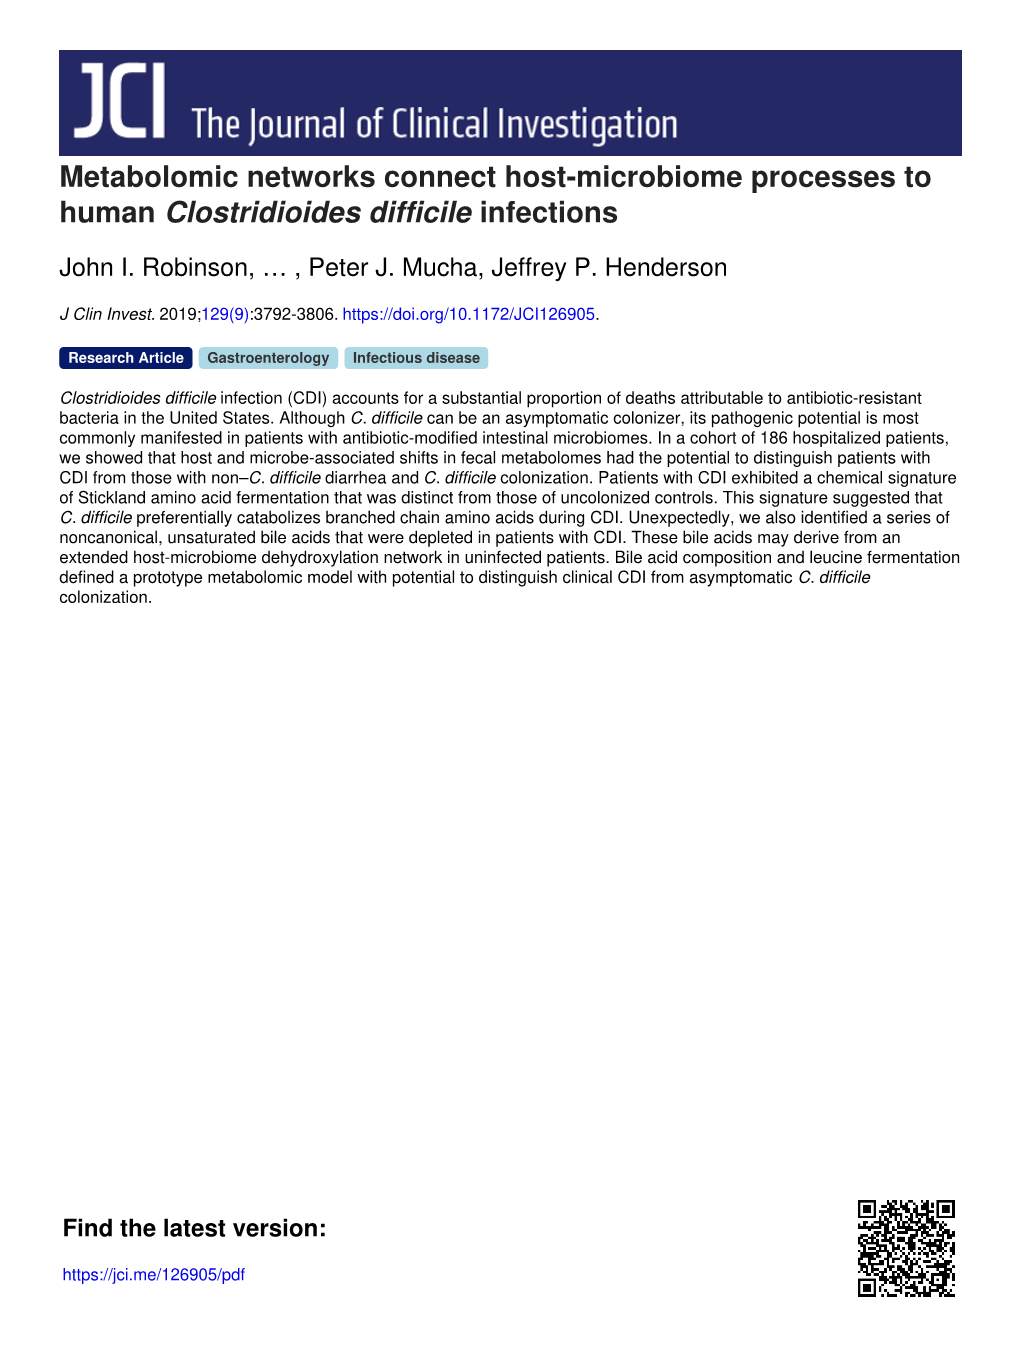 Metabolomic Networks Connect Host-Microbiome Processes to Human Clostridioides Difficile Infections